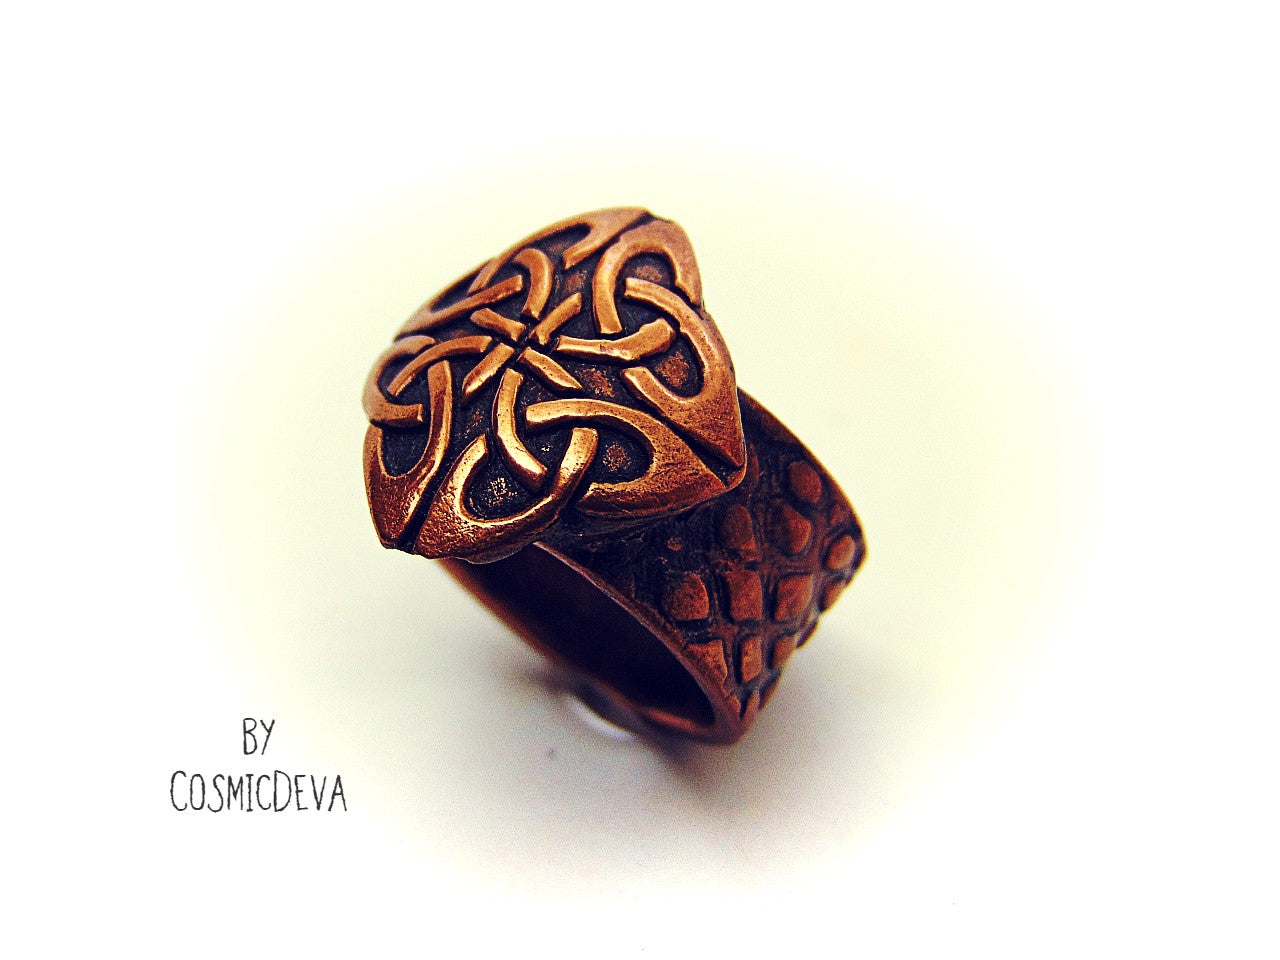 Celtic Knot Copper Ring, Celtic Jewelry, Norse Ring, US SIZE 7 Ring. Handmade and kiln fired Celtic knot ring made of pure copper. The copper ring was oxidized to bring out the beautiful texture and give it an antique look. This ring is sealed with varnish. Comes in a beautiful gift box. - CosmicDeva